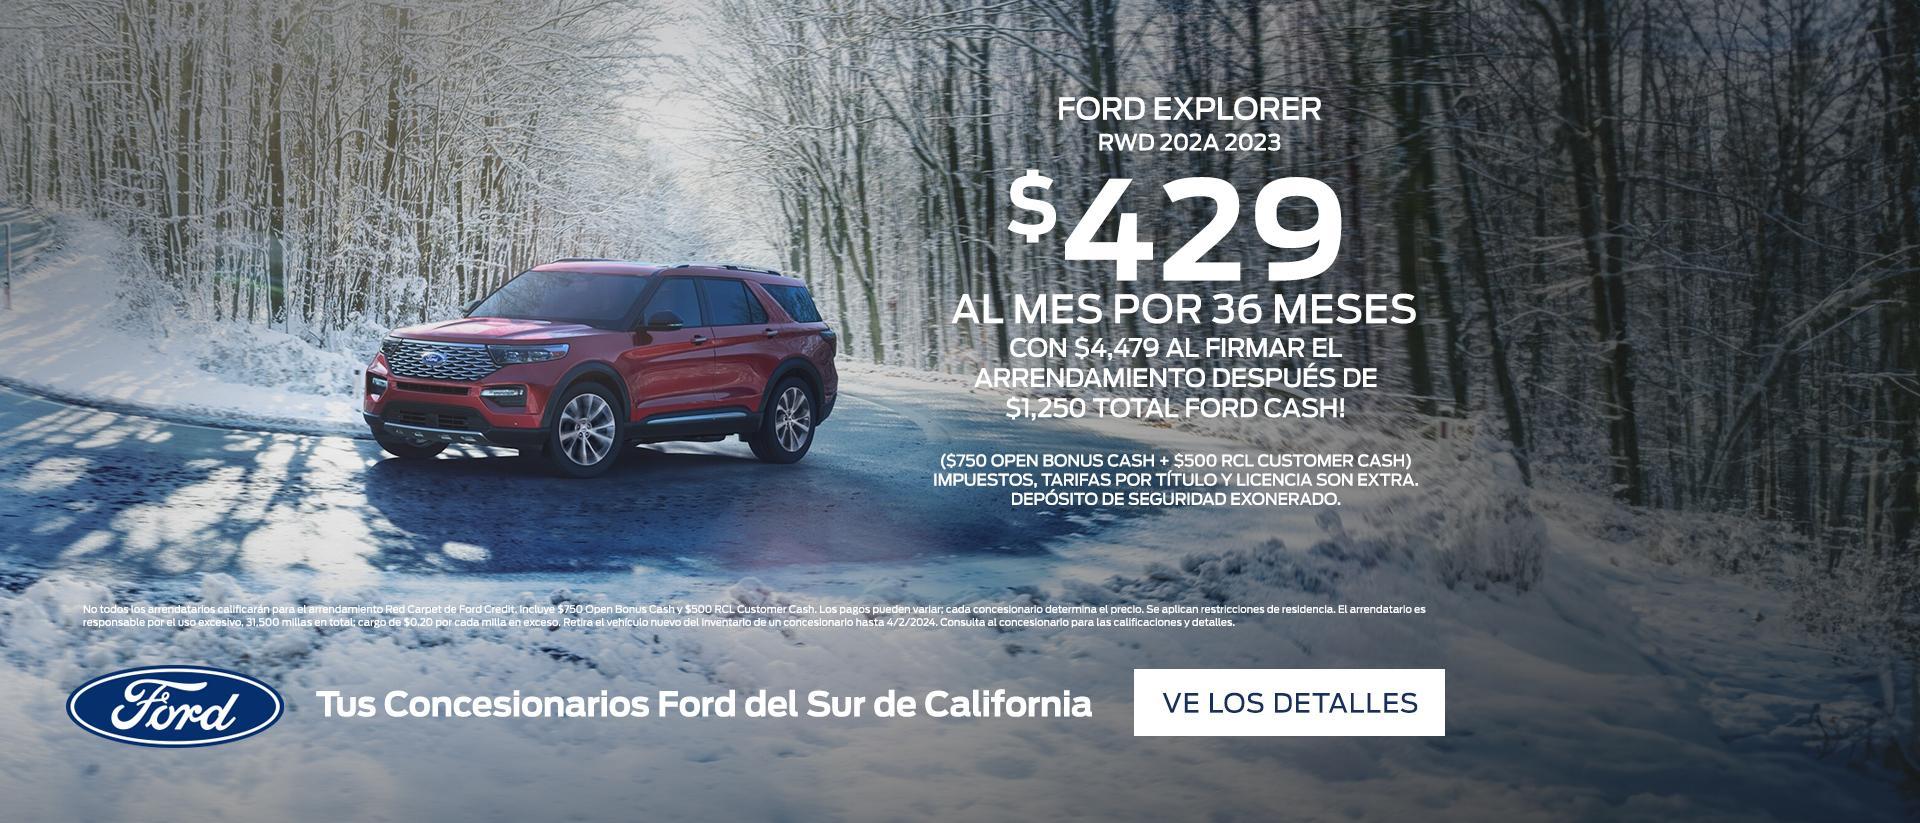 2023 Ford Explorer Lease Offer | Southern California Ford Dealers